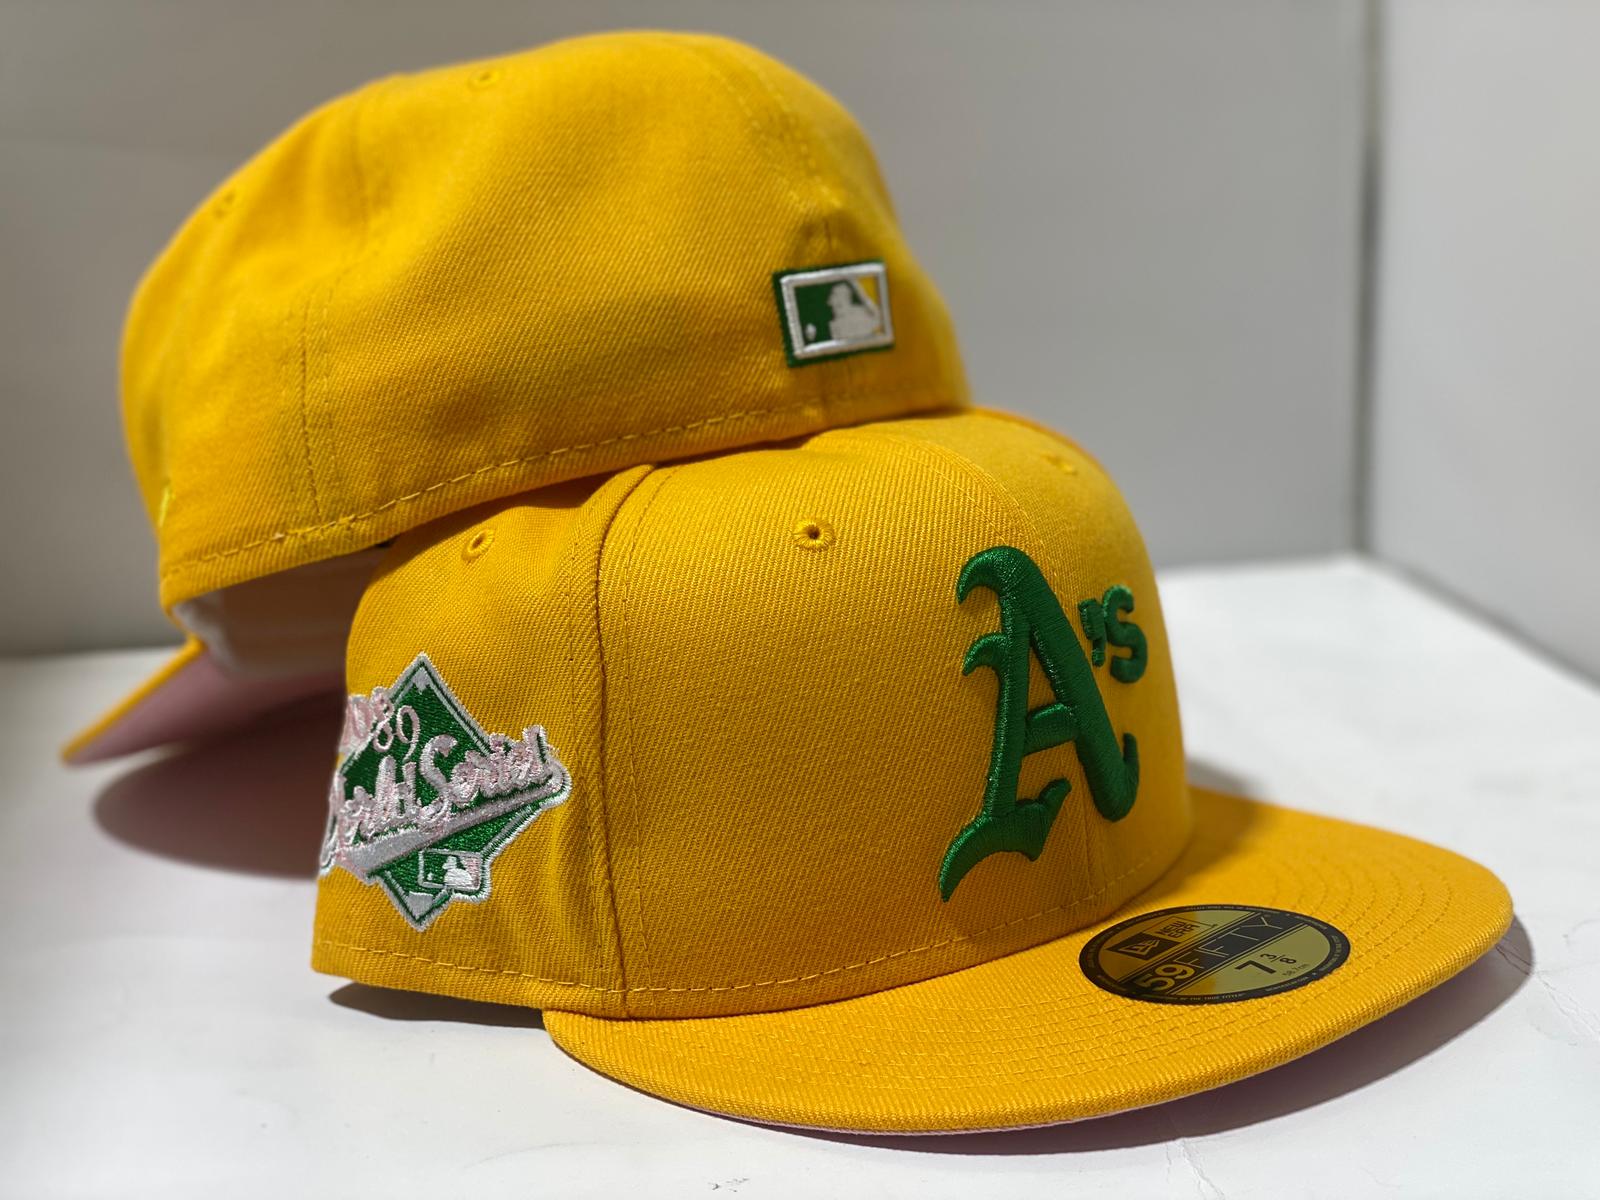 New Era baseball hats set a new low for centuries-old sport